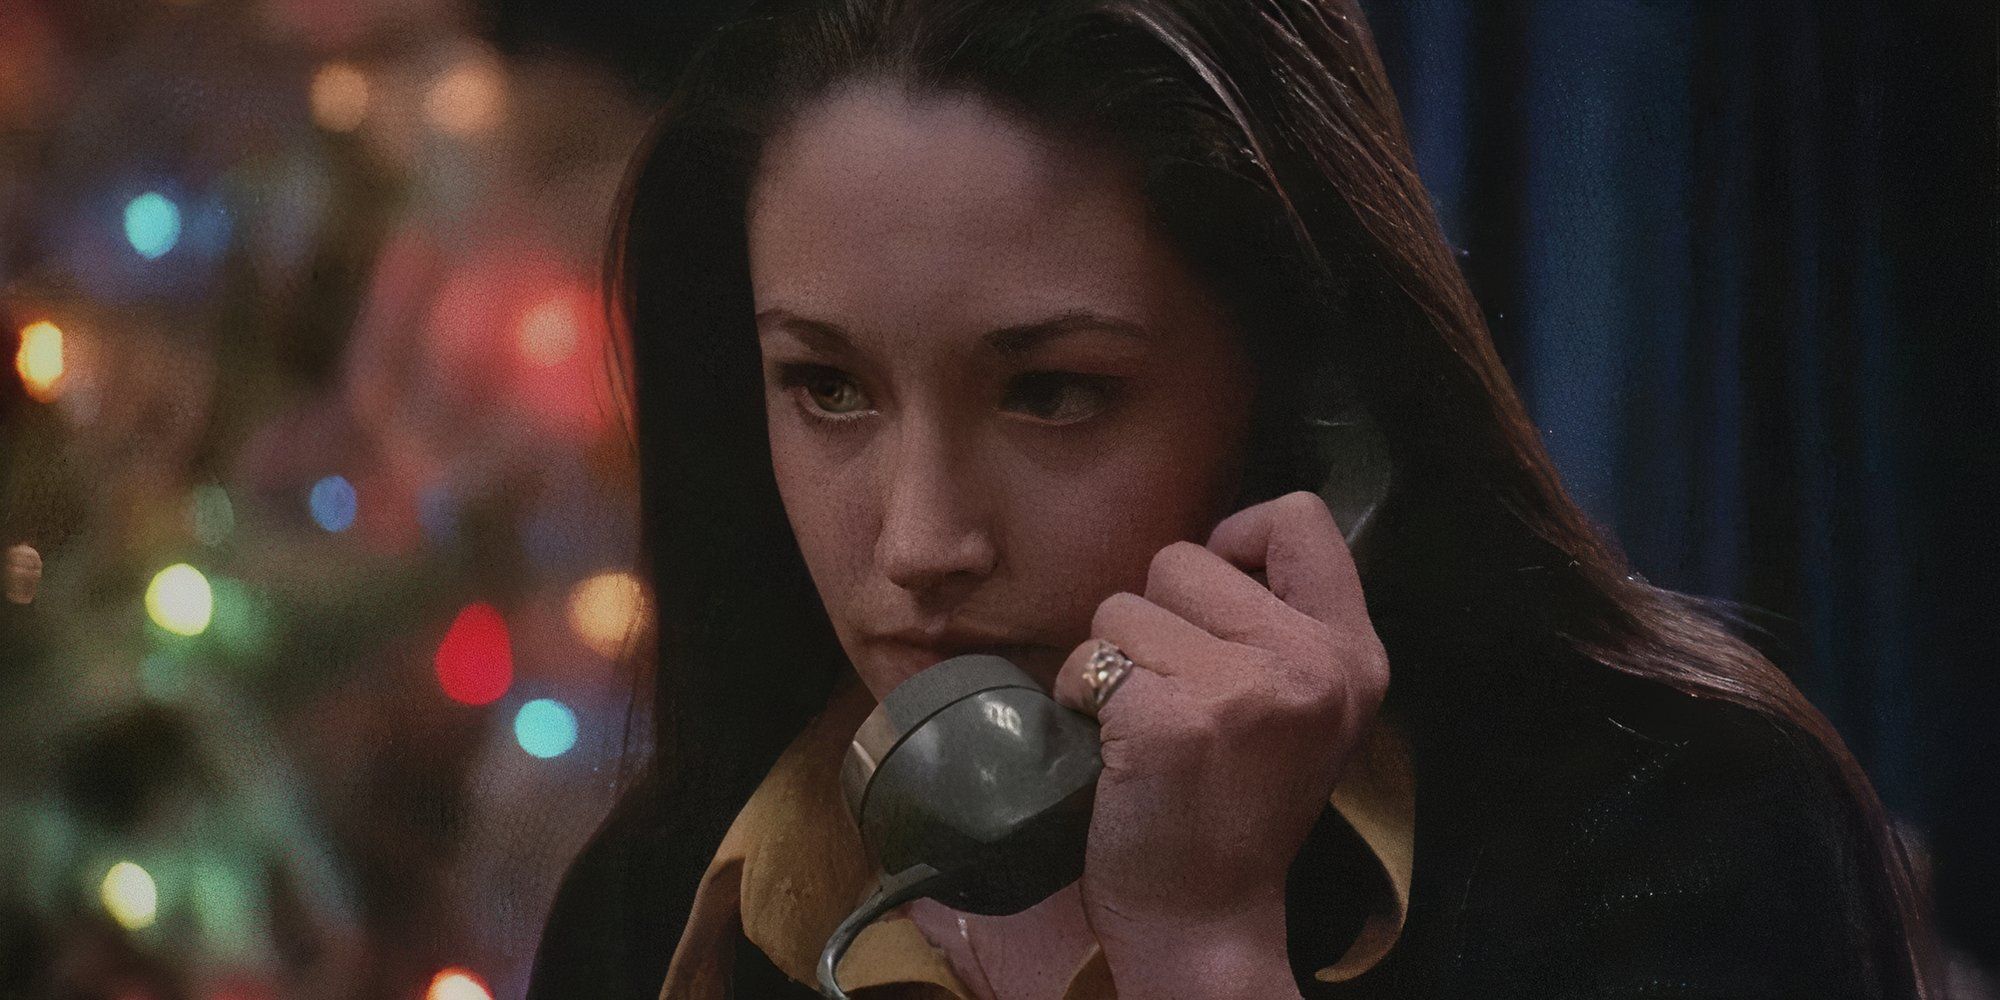 Olivia Hussey as Jess Bradford in Black Christmas speaking on the phone.